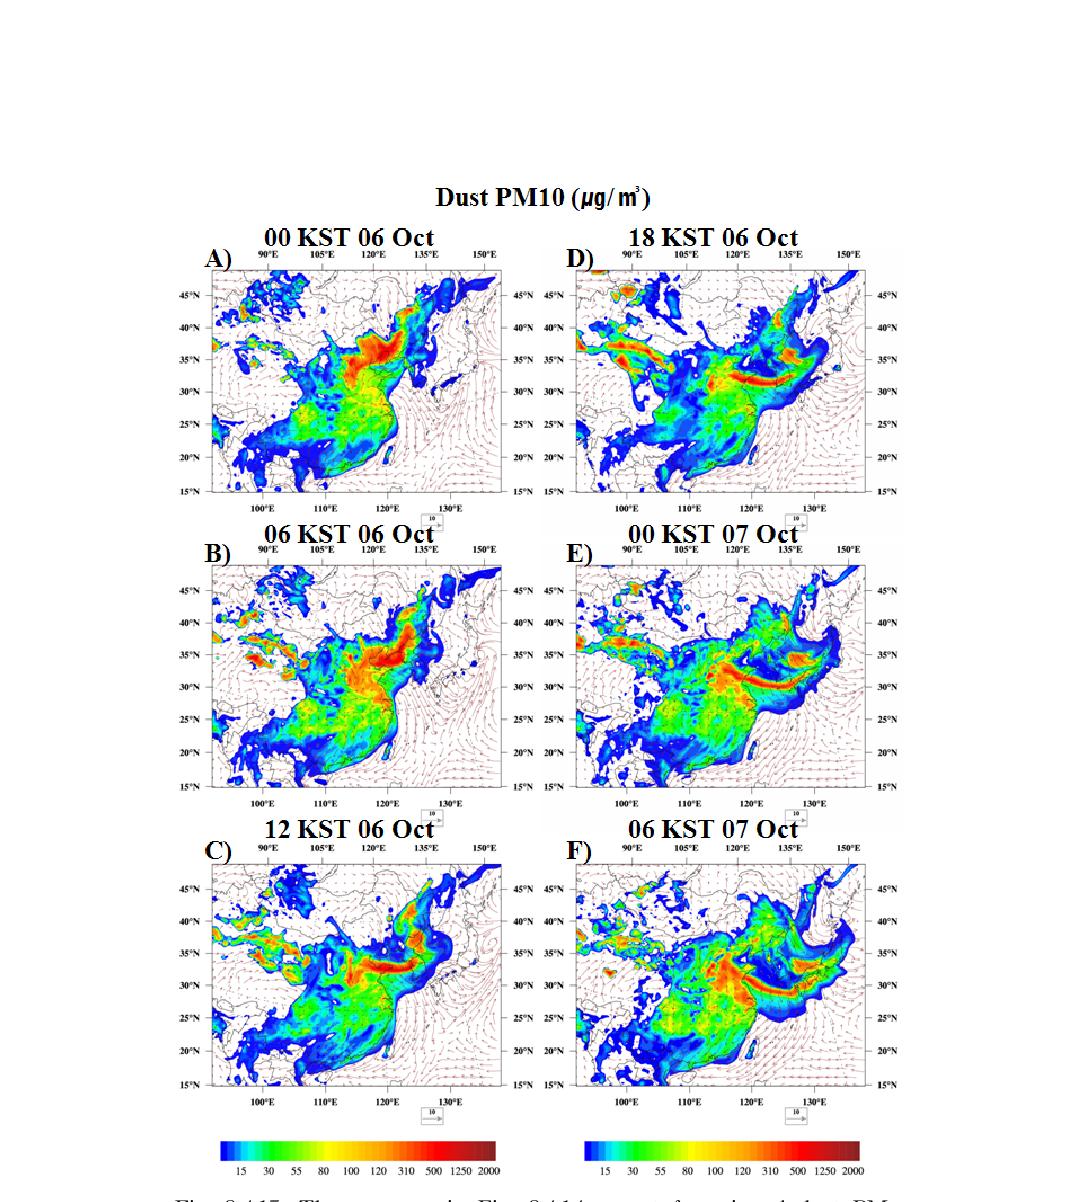 The same as in Fig. 3.4.14 except for mineral dust PM10 concentration.